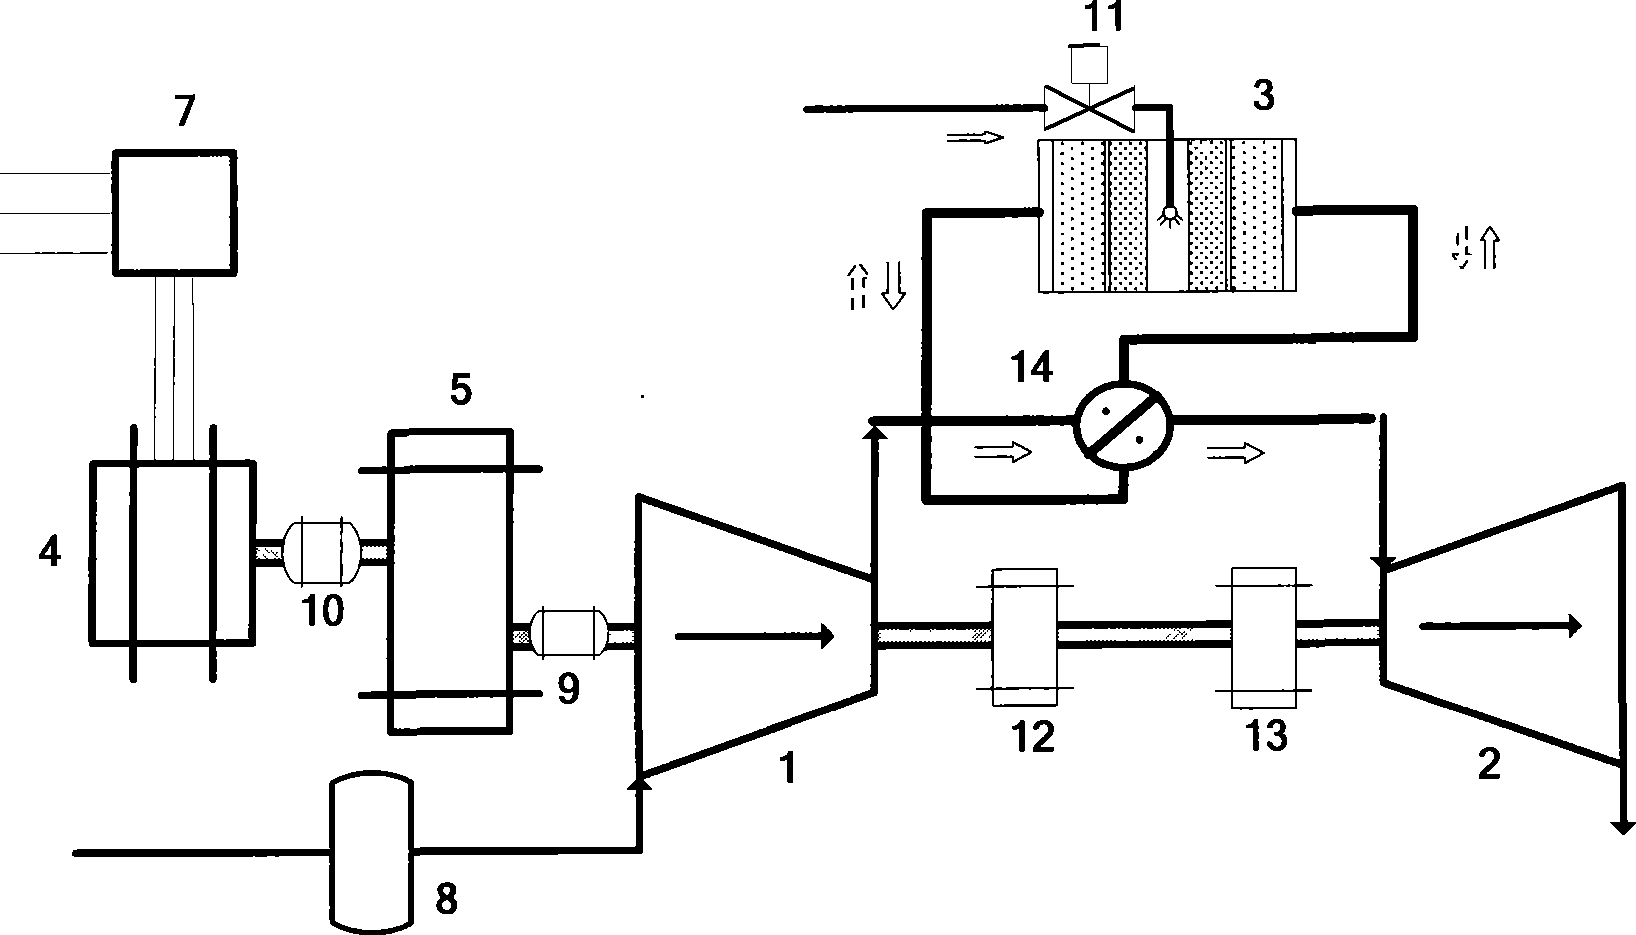 Generator provided with switching catalytic combustion gas turbine